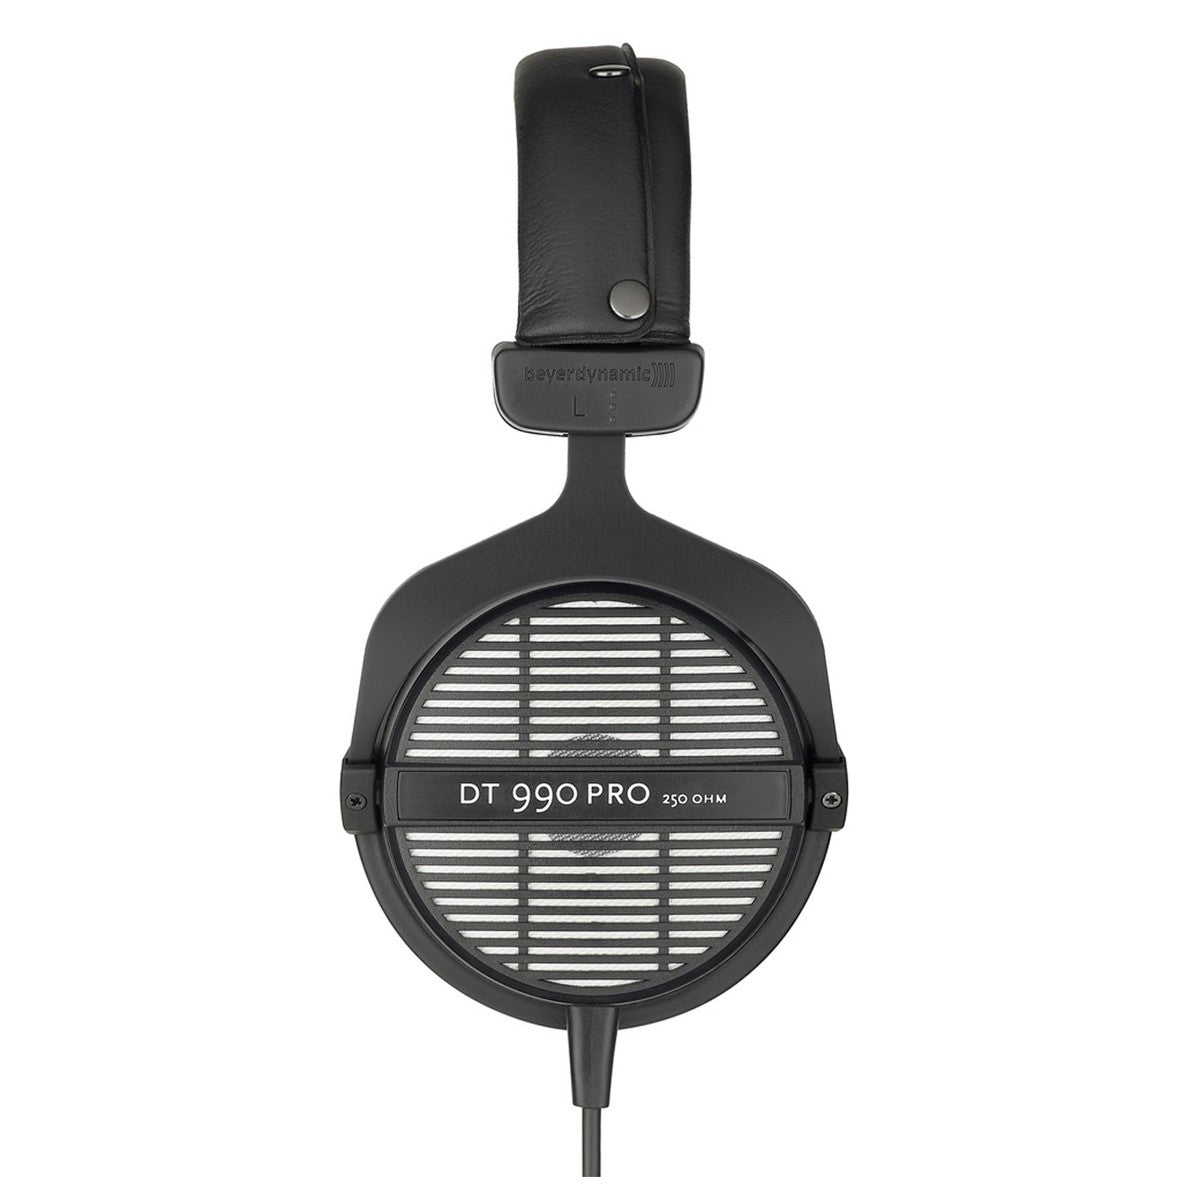 Beyerdynamic DT990 PRO 250ohm - Call to confirm stock